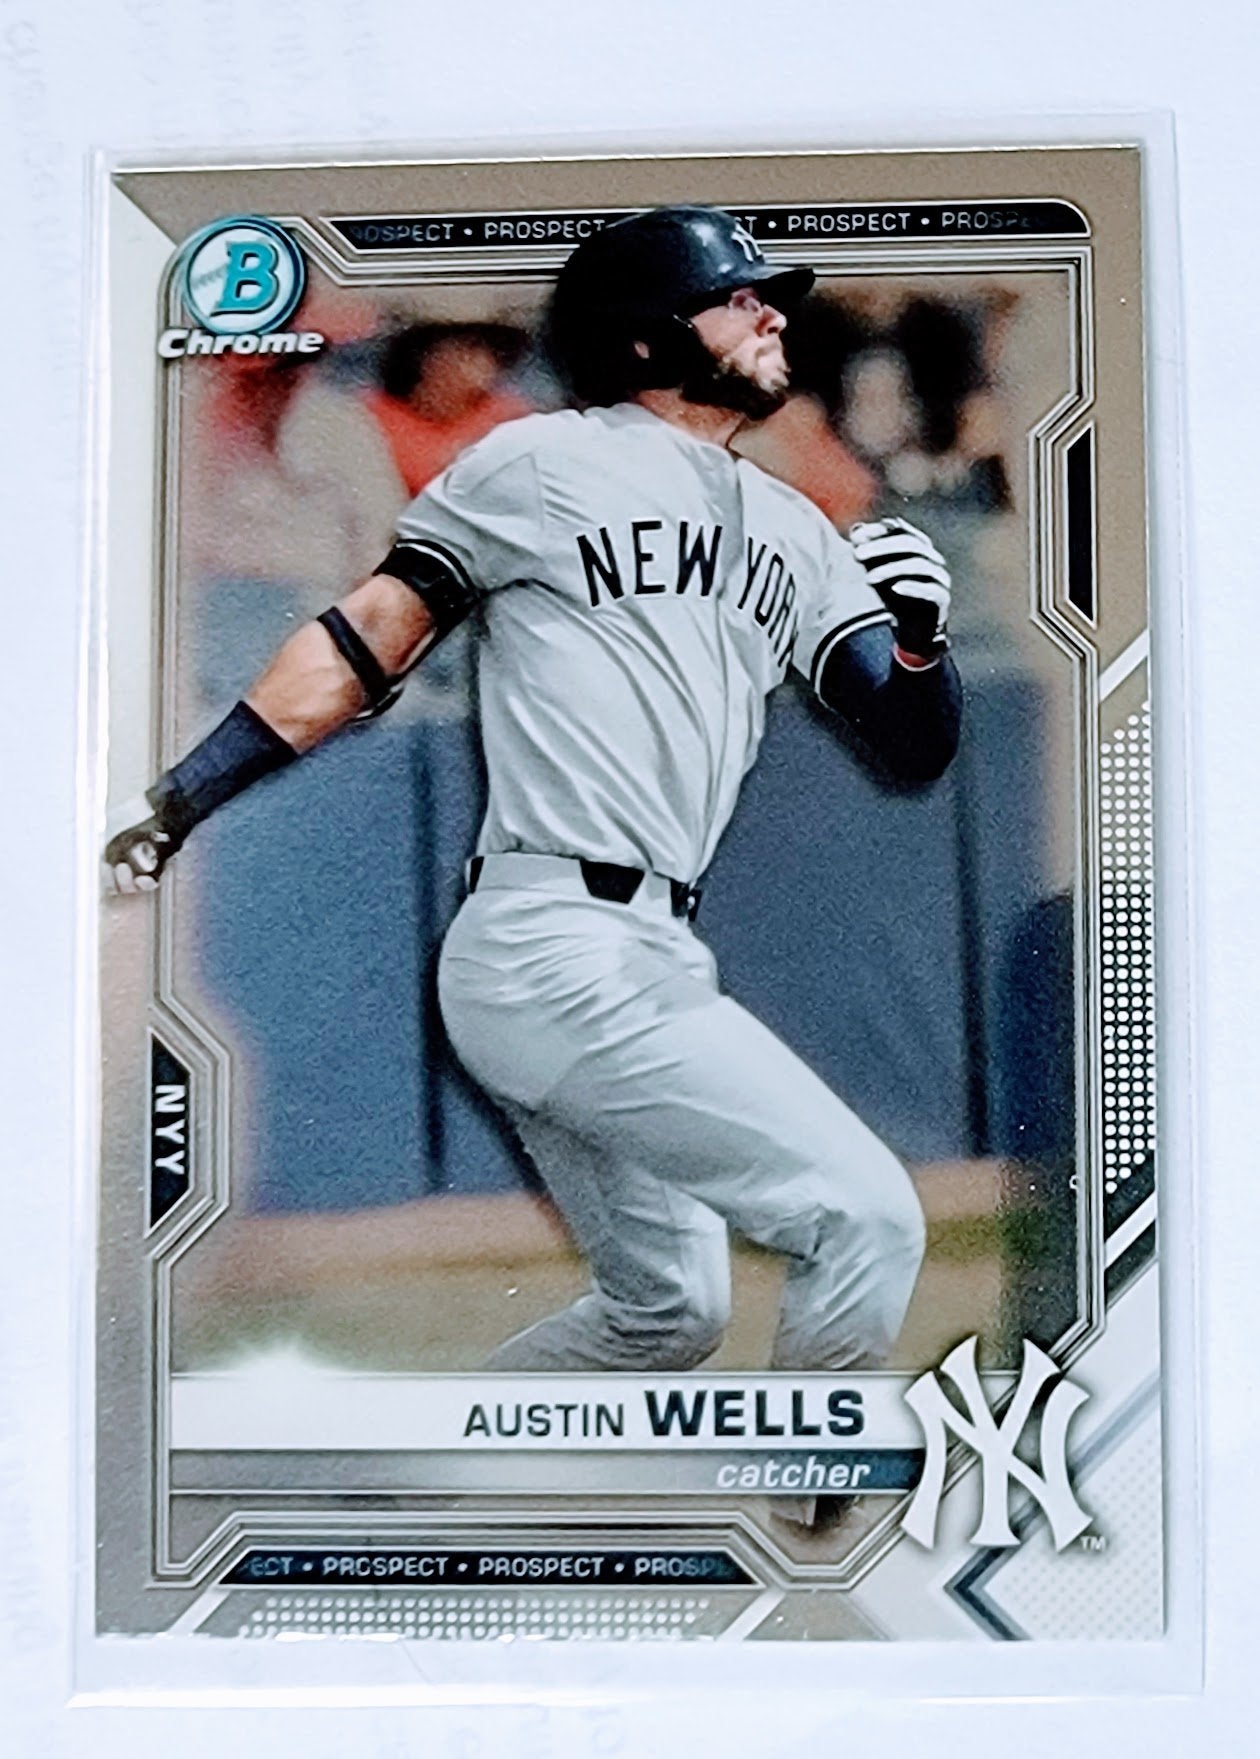 2021 Bowman Chrome Austin Wells Prospect Baseball Trading Card SMCB1 simple Xclusive Collectibles   